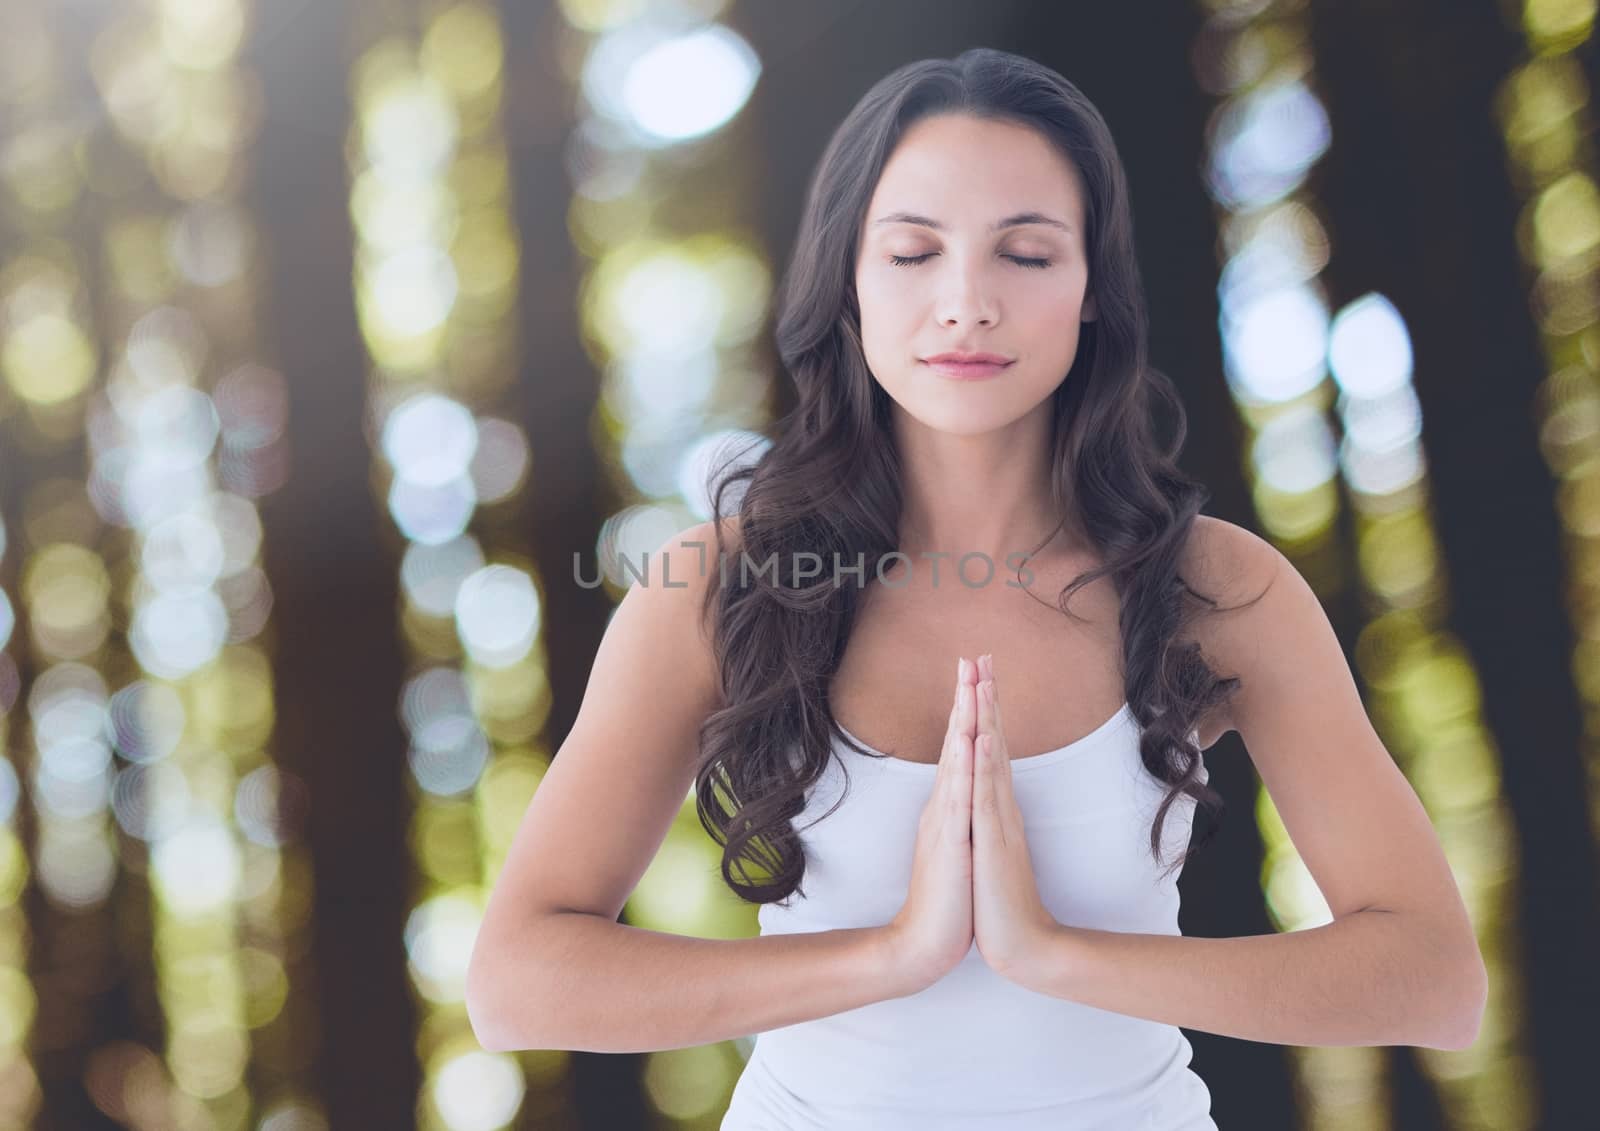 Digital composite of Woman Praying Meditating yoga peaceful in forest